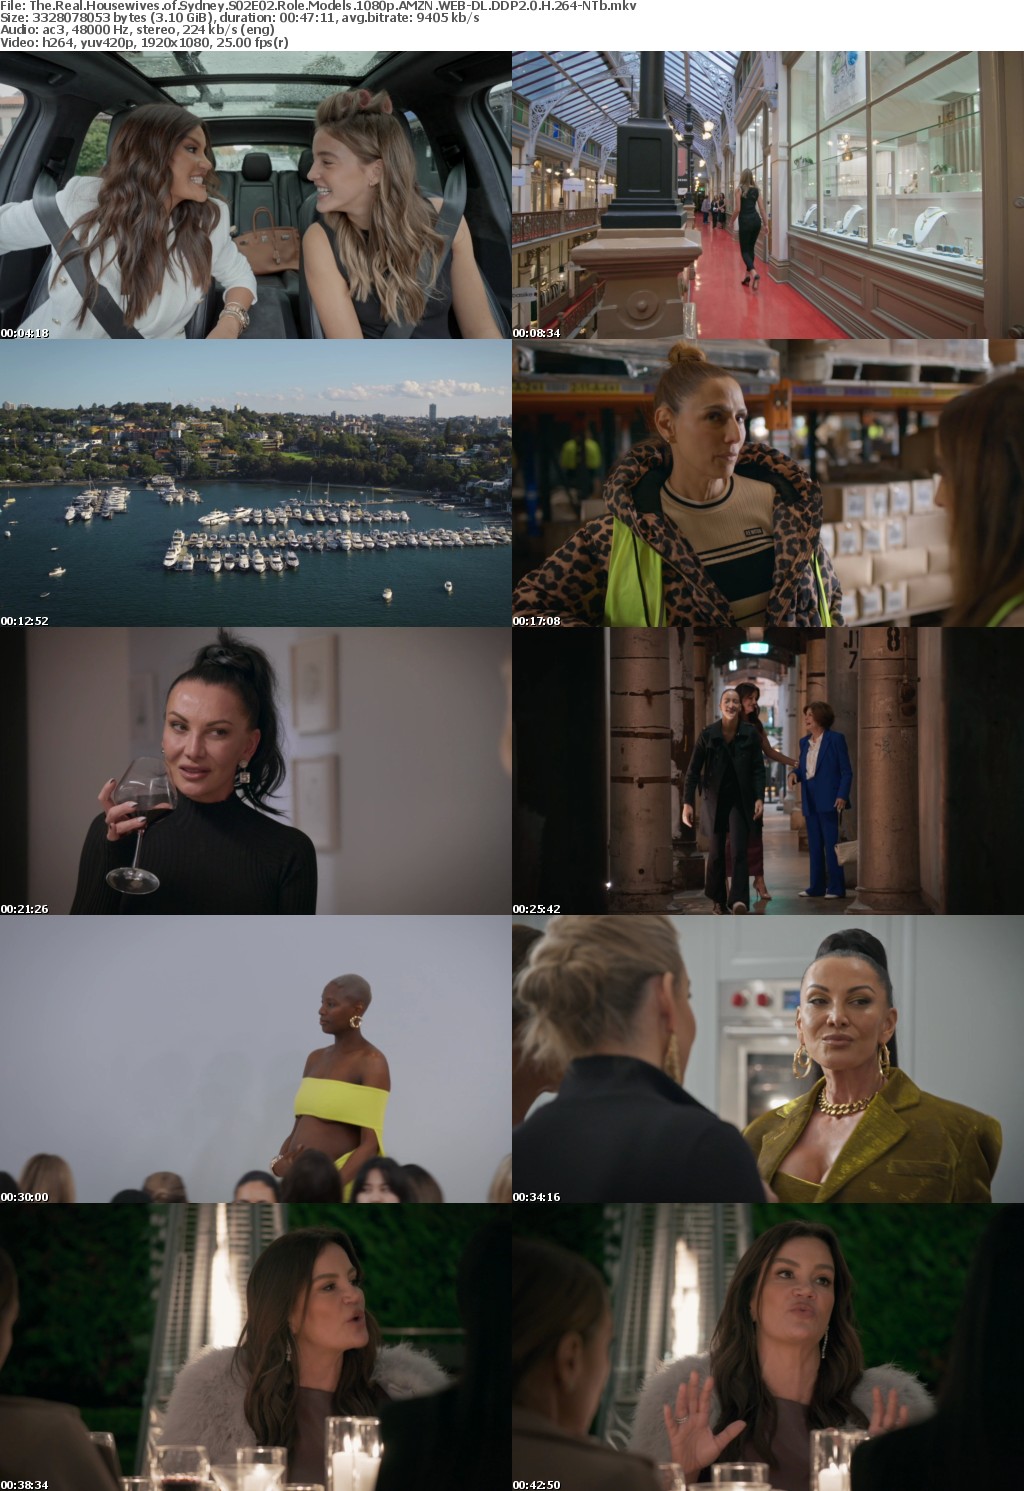 The Real Housewives of Sydney S02E02 Role Models 1080p AMZN WEB-DL DDP2 0 H 264-NTb